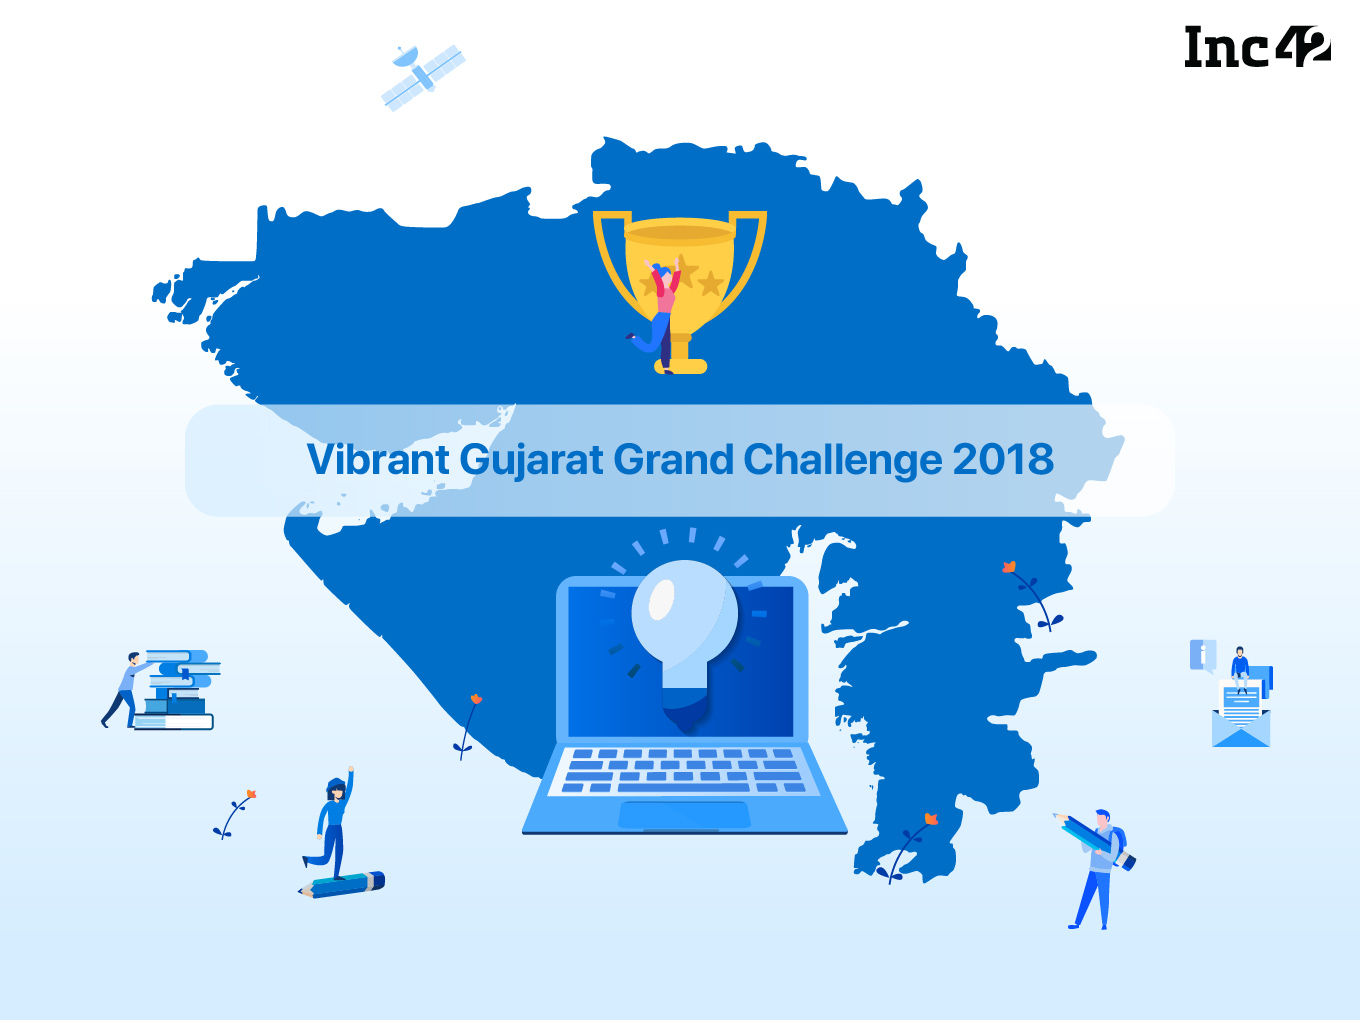 Time To Step Up Your Game: Vibrant Gujarat Grand Challenge Is Here With Prizes Worth $423.7K (INR 3 Cr) Up For Grabs